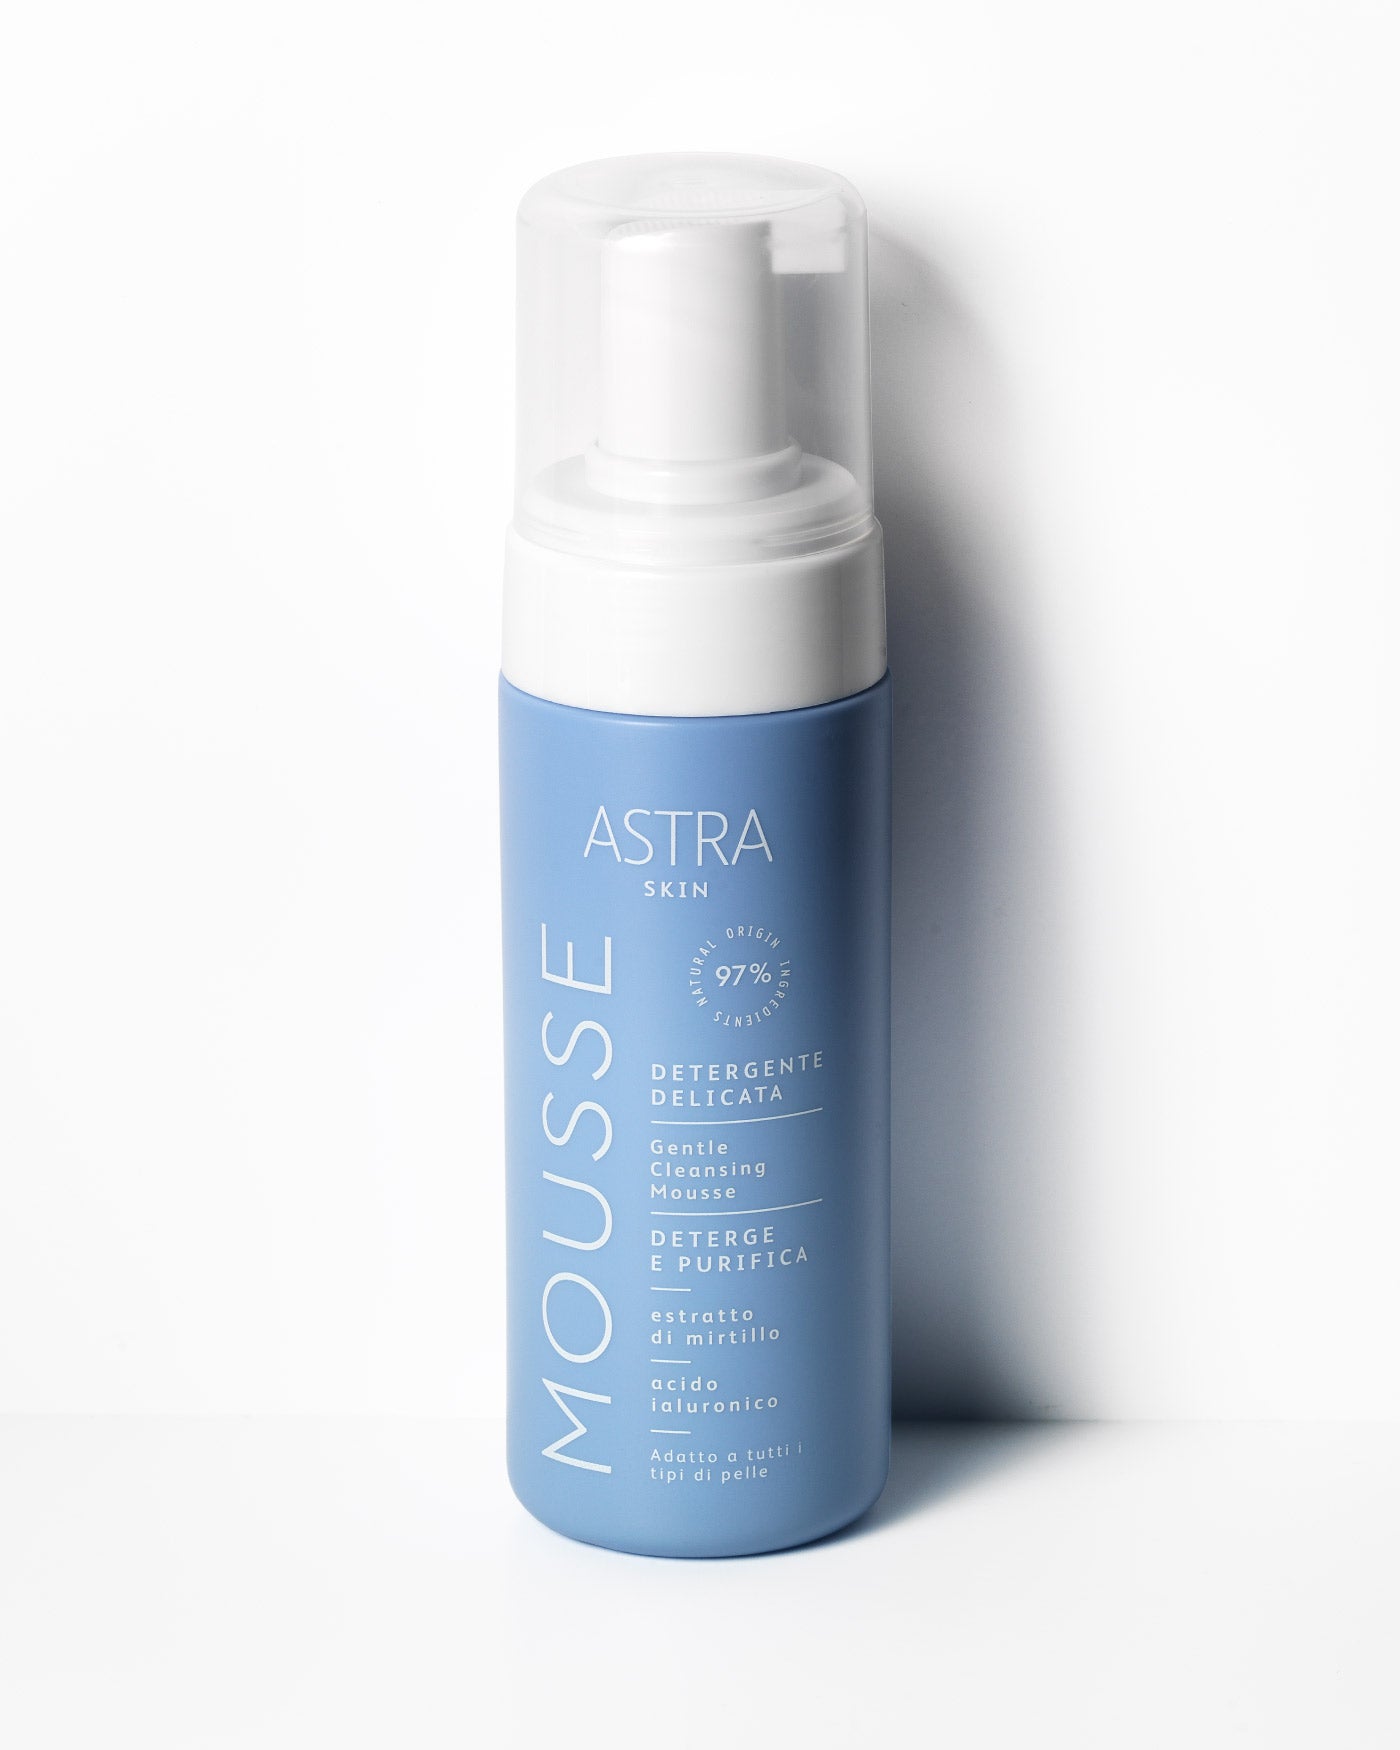 MOUSSE DETERGENTE DELICATA - All Products - Astra Make-Up